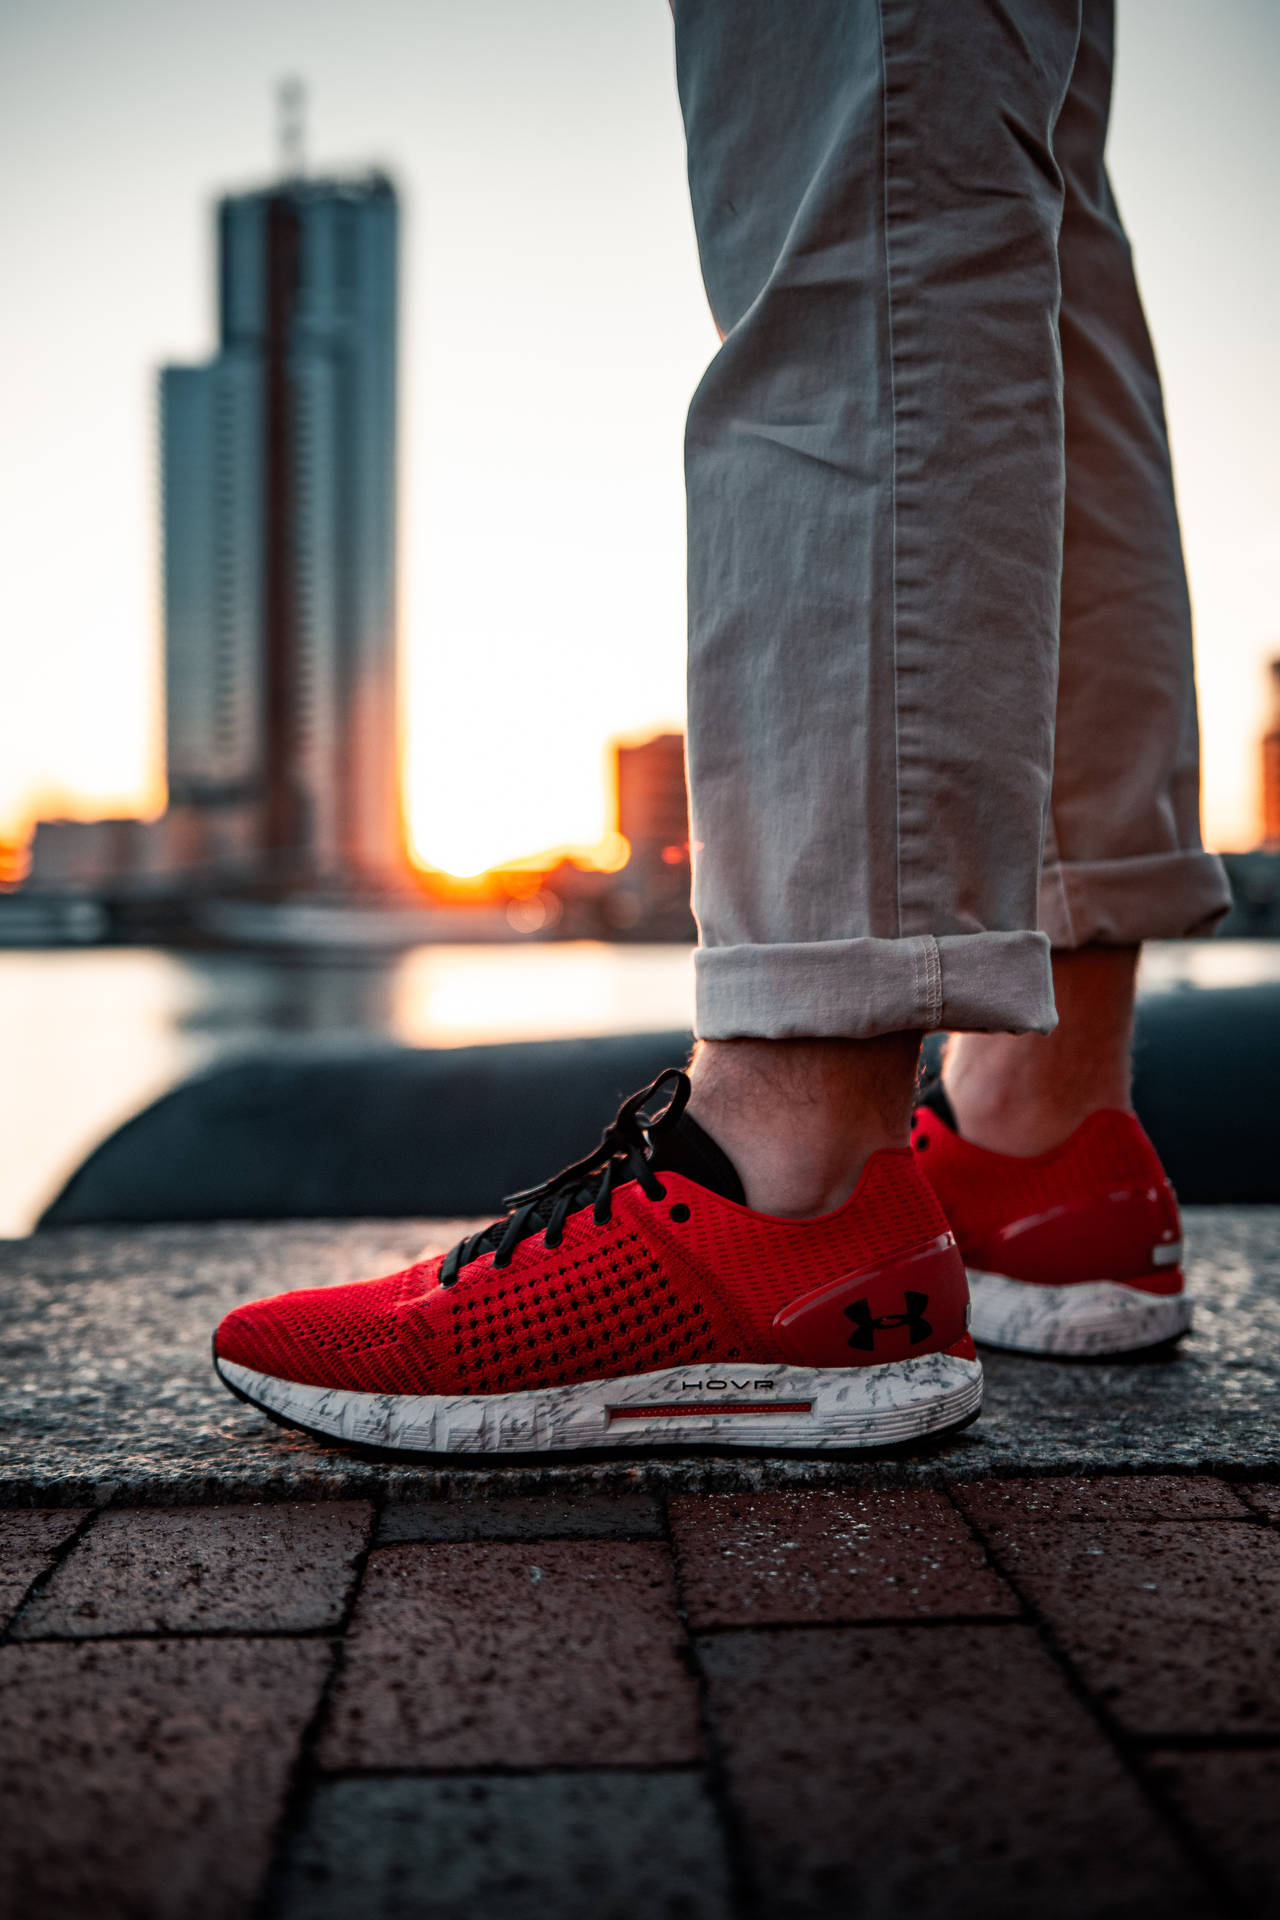 Under Armour Red Rubber Shoes Wallpaper